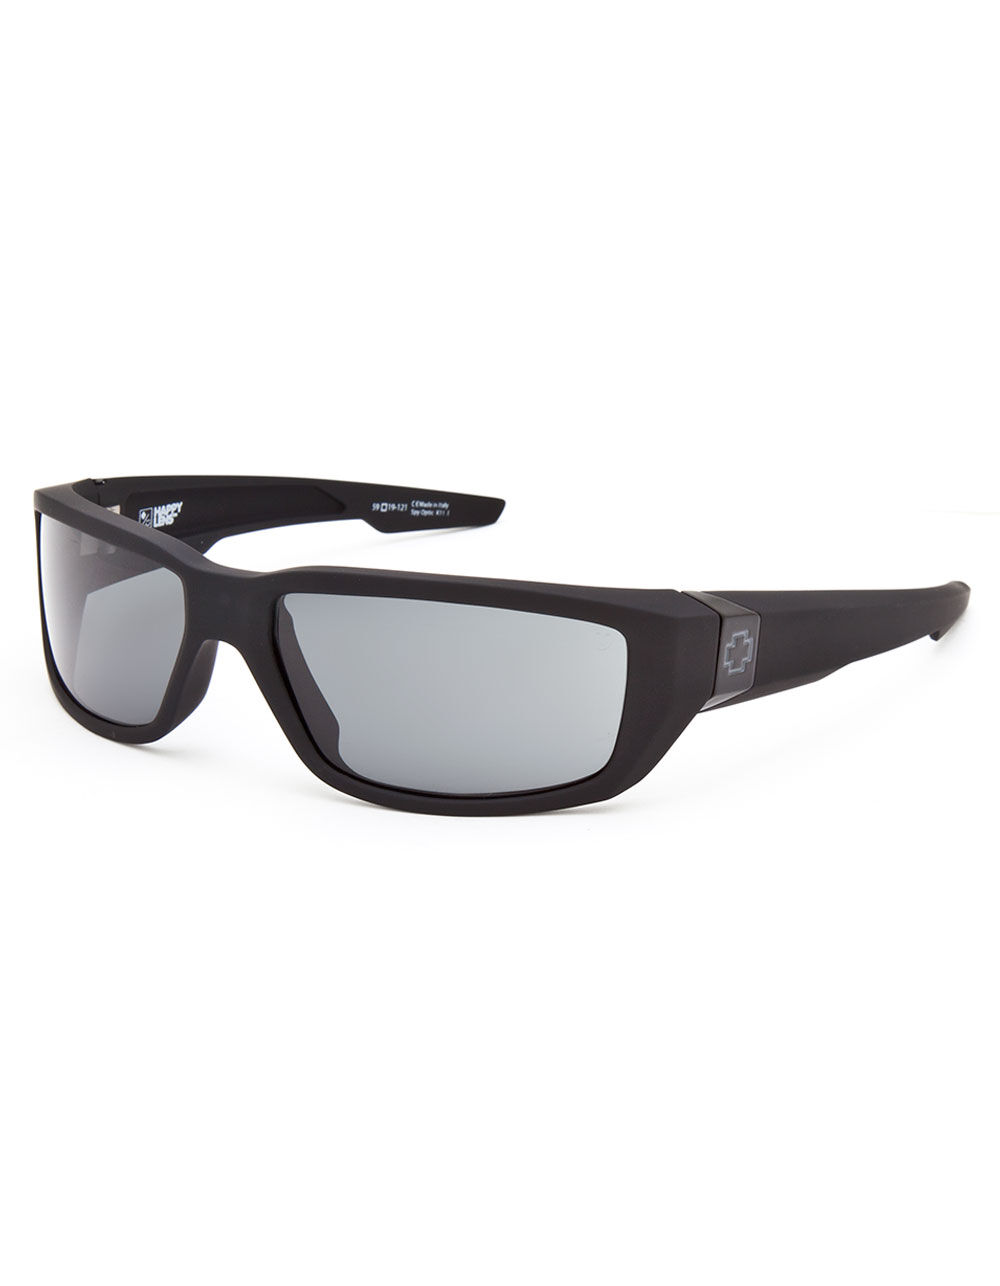 SPY DALE JR. 88 COLLECTION HAPPY LENS DIRTY MO SUNGLASSES